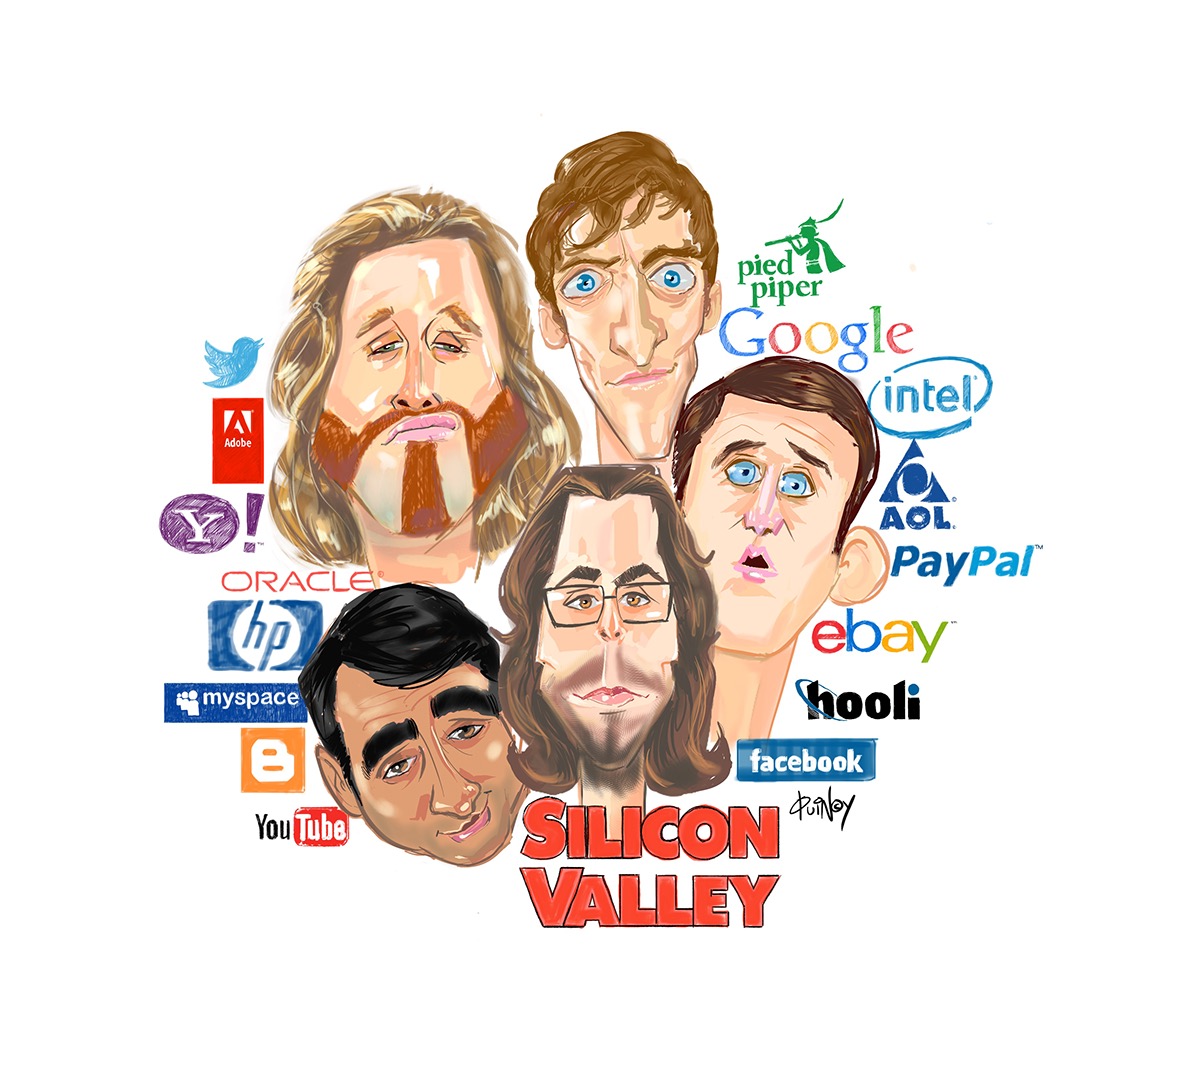 caricatures illustrations editorial Quincy Sutton hbo Silicon Valley twitter google yahoo paypal eBay facebook